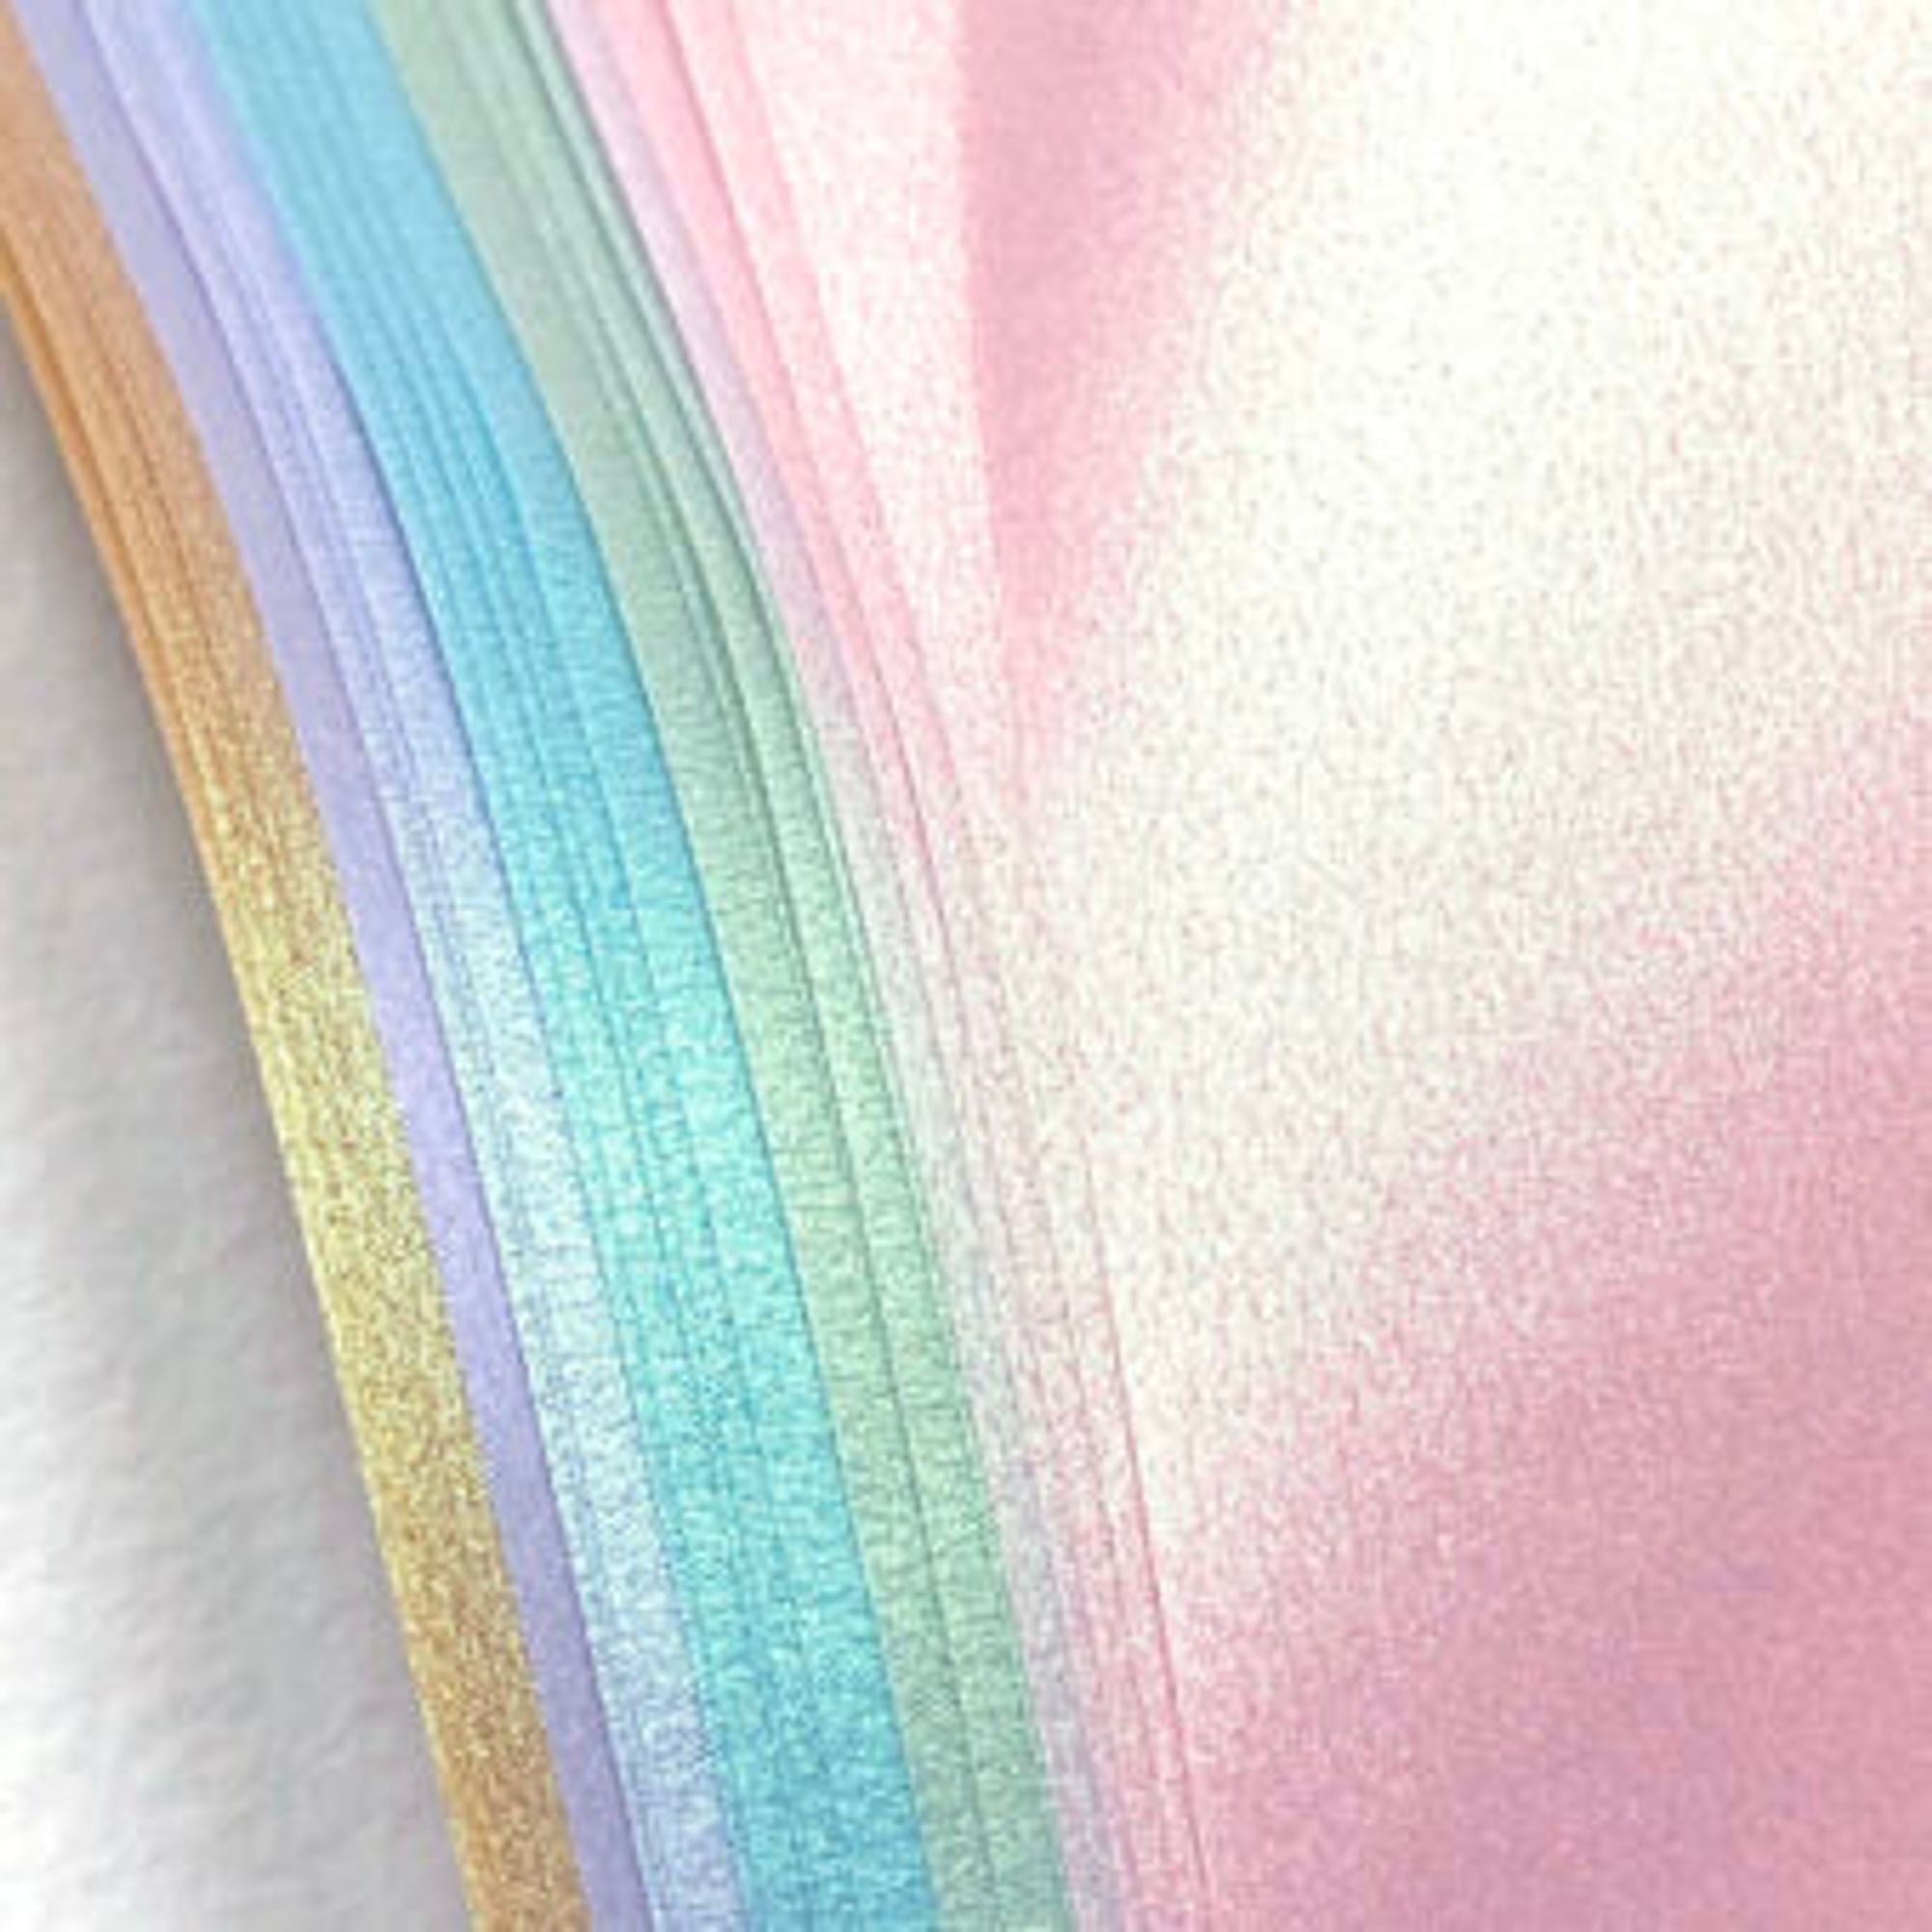 Shimmer Vellum 12x12 - Spring Assortment - 5 Sheets(1 each of 5 colors)